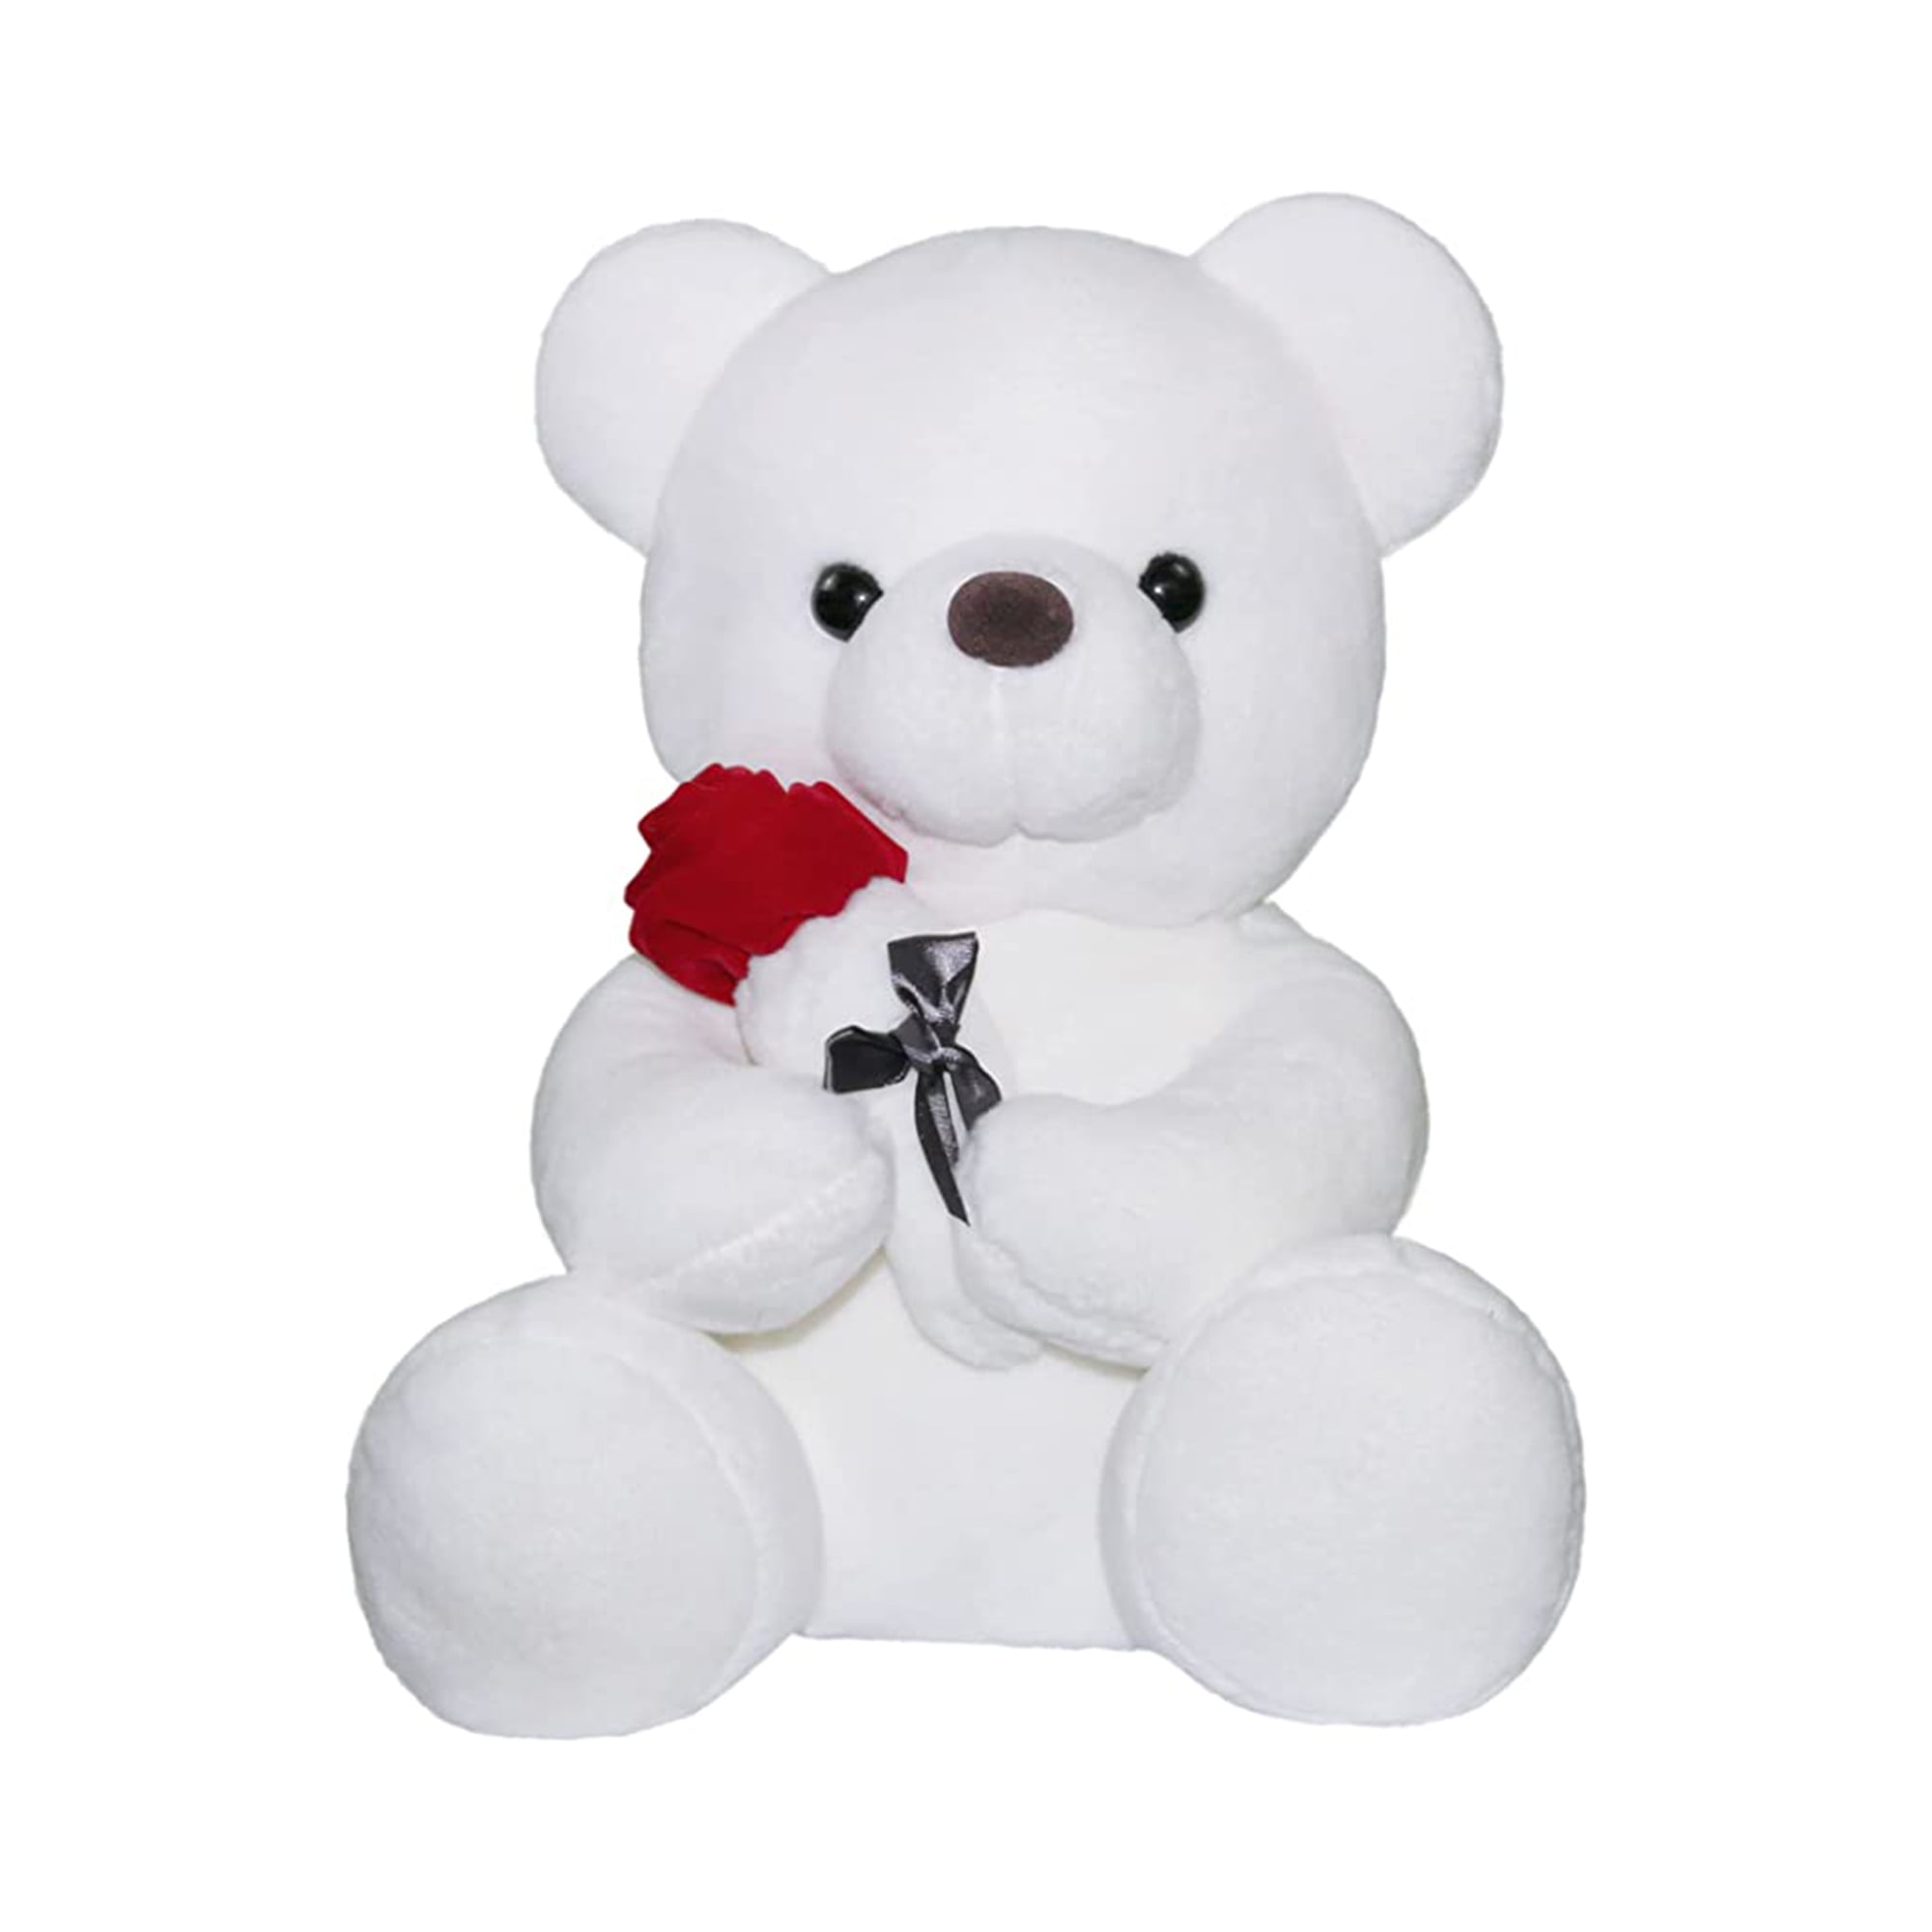 All Color Teddy Bear For Birthday Gifts For Girls /Boys /Girlfriend /Lovable